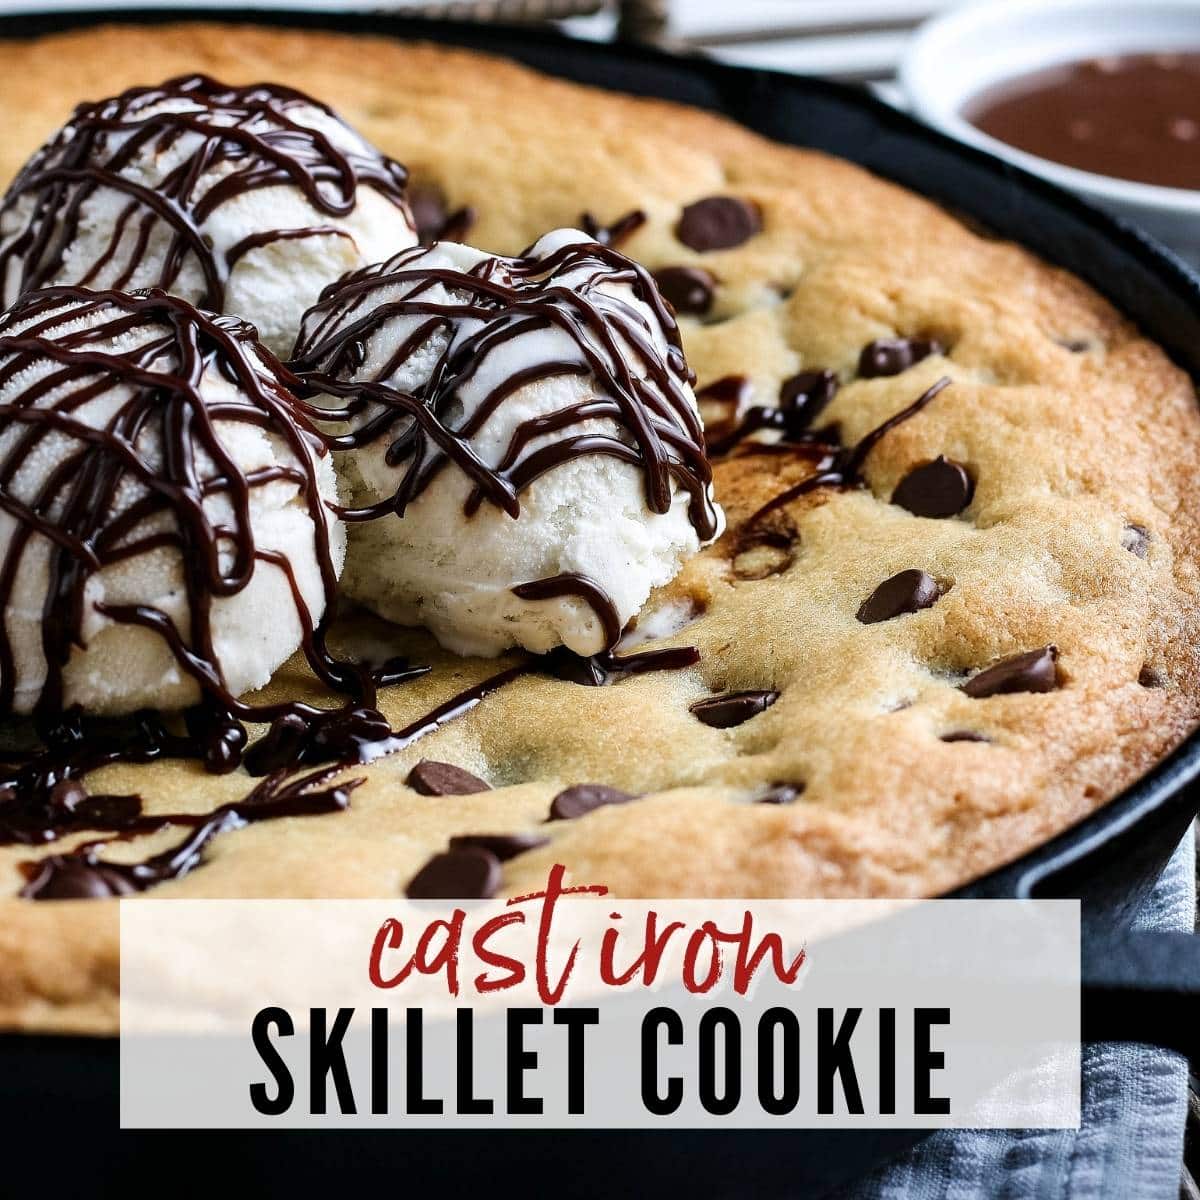 Cast Iron Skillet Chocolate Chunk Cookie - The Hurried Hostess